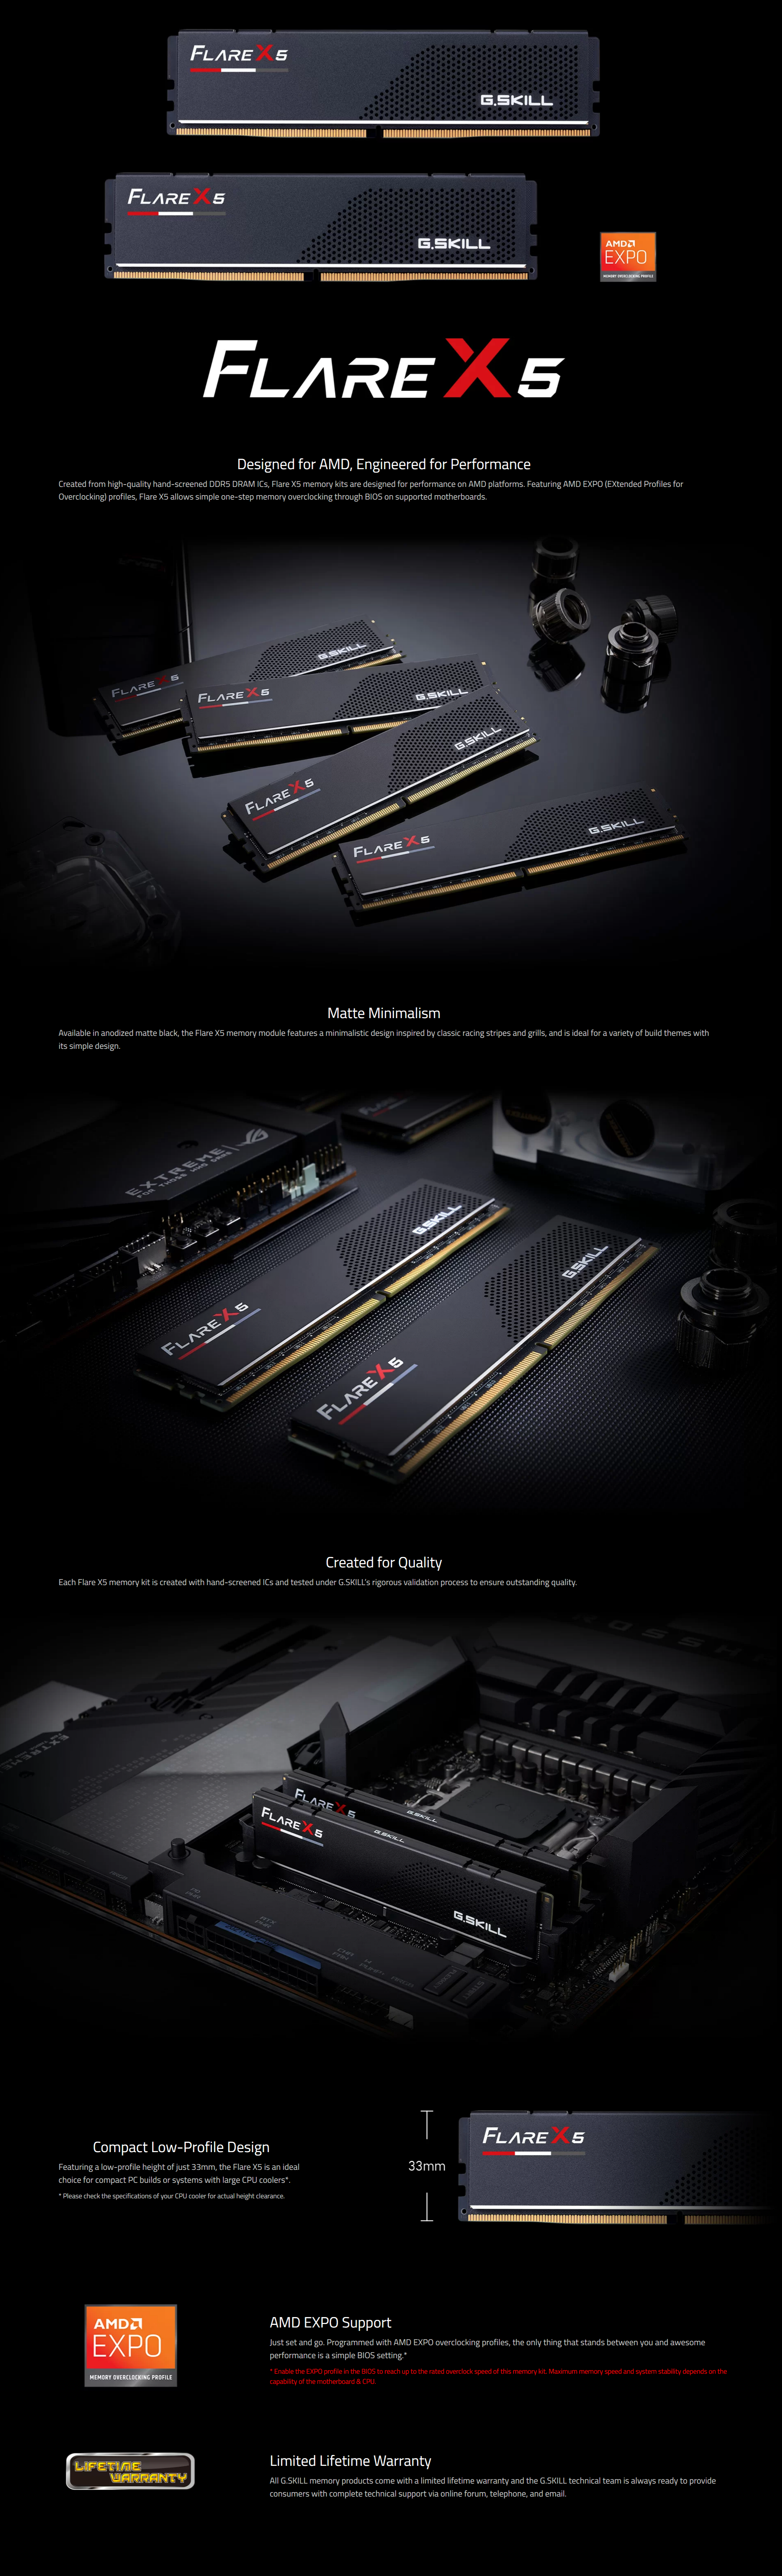 A large marketing image providing additional information about the product G.Skill 32GB Kit (2x16GB) DDR5 FlareX5 AMD EXPO C36 6000MHz - Black - Additional alt info not provided